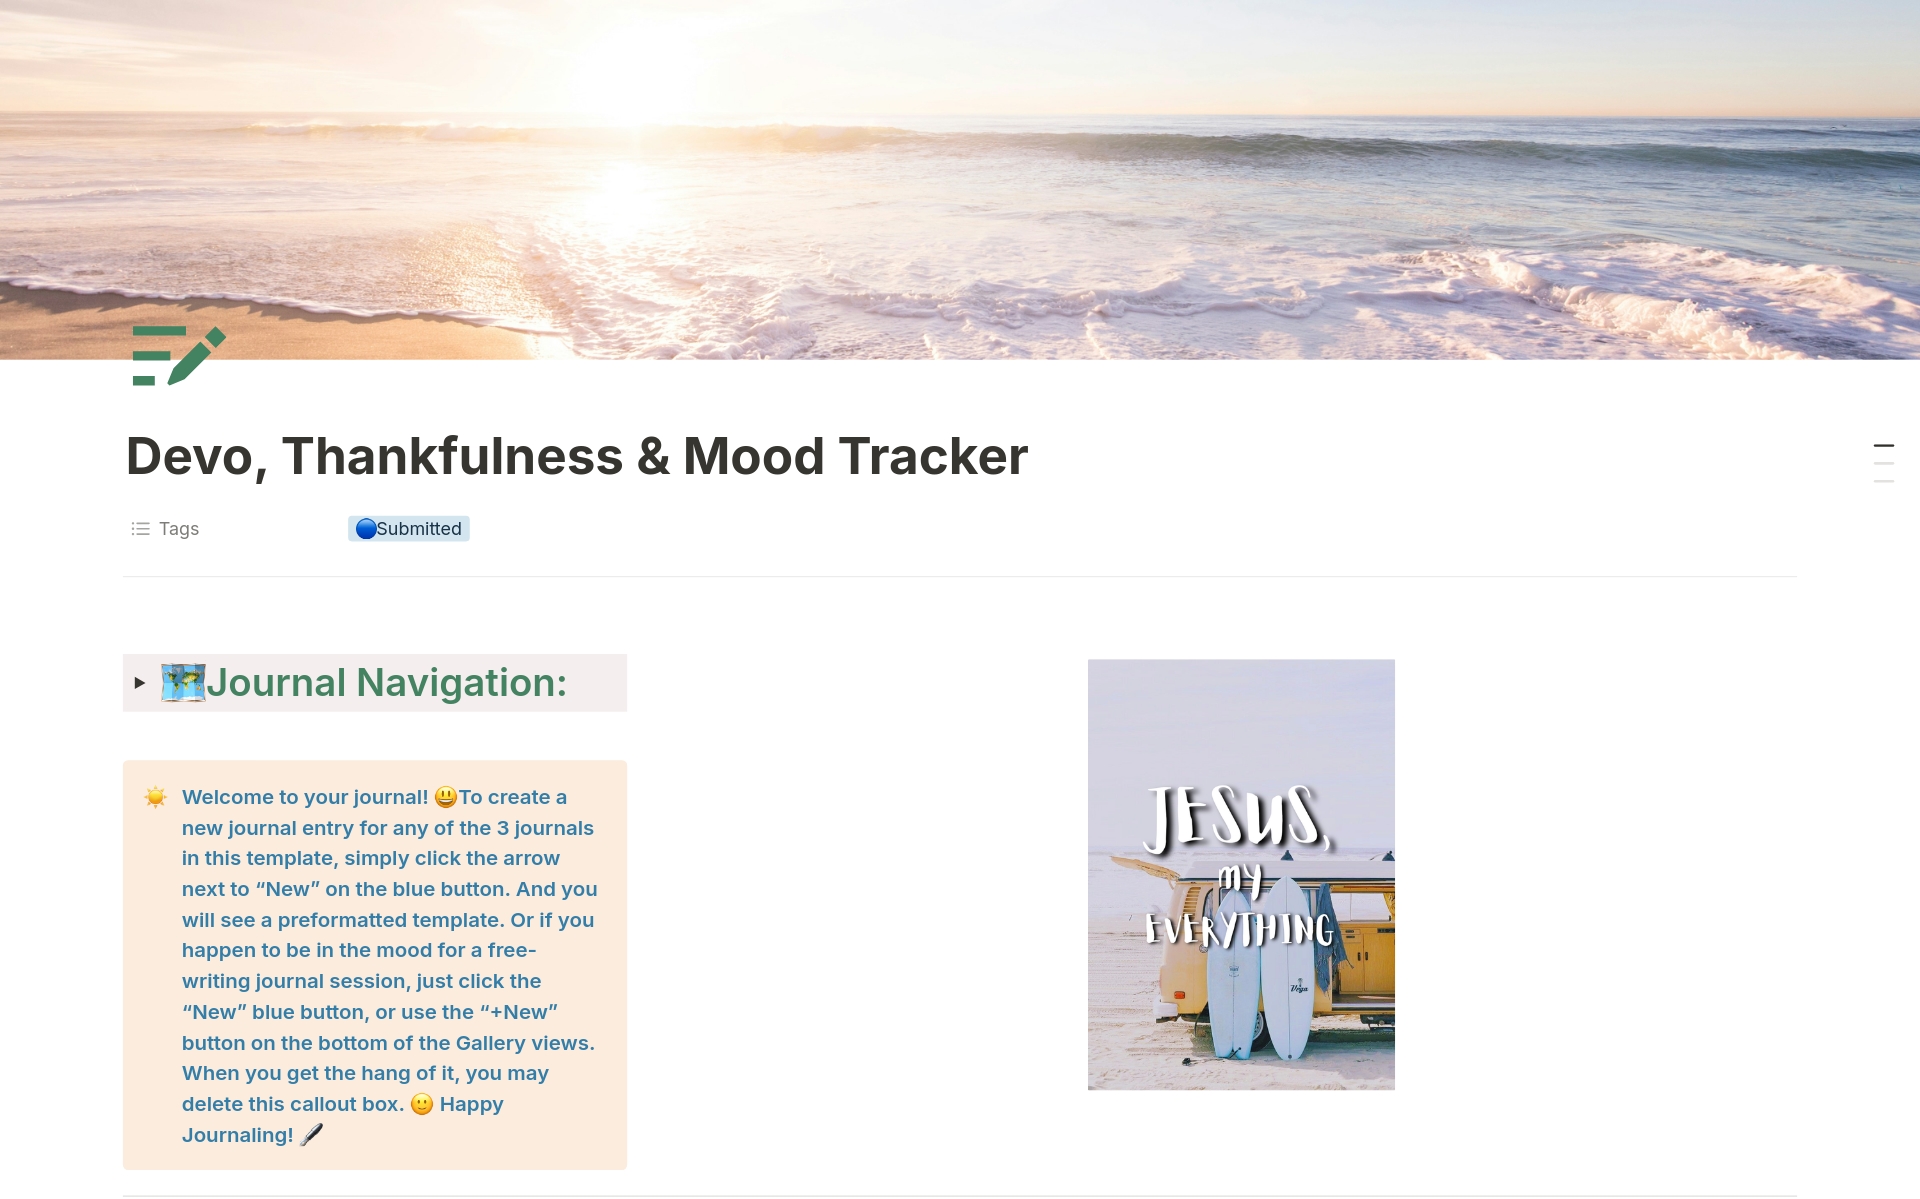 An all-in-one daily devo, thankfulness journal & mood tracker. 